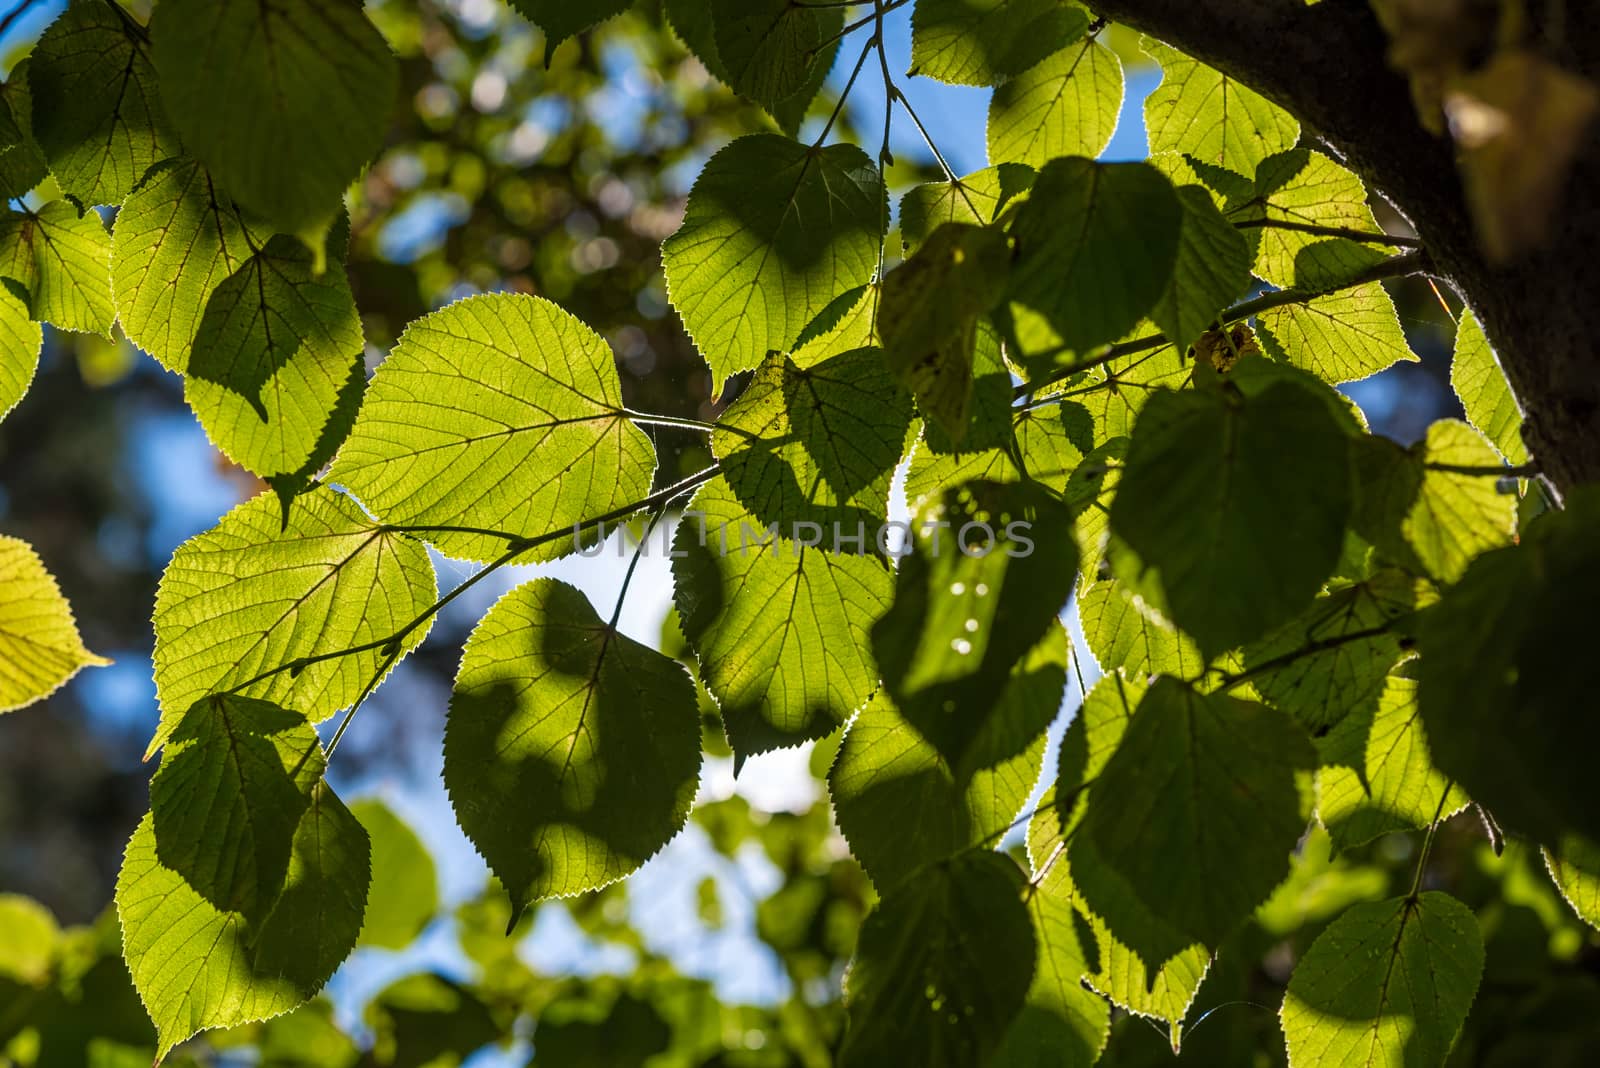 Leaves of linden tree lit thorough by sun/Sunny linden leaves/Sun shining through leaves.